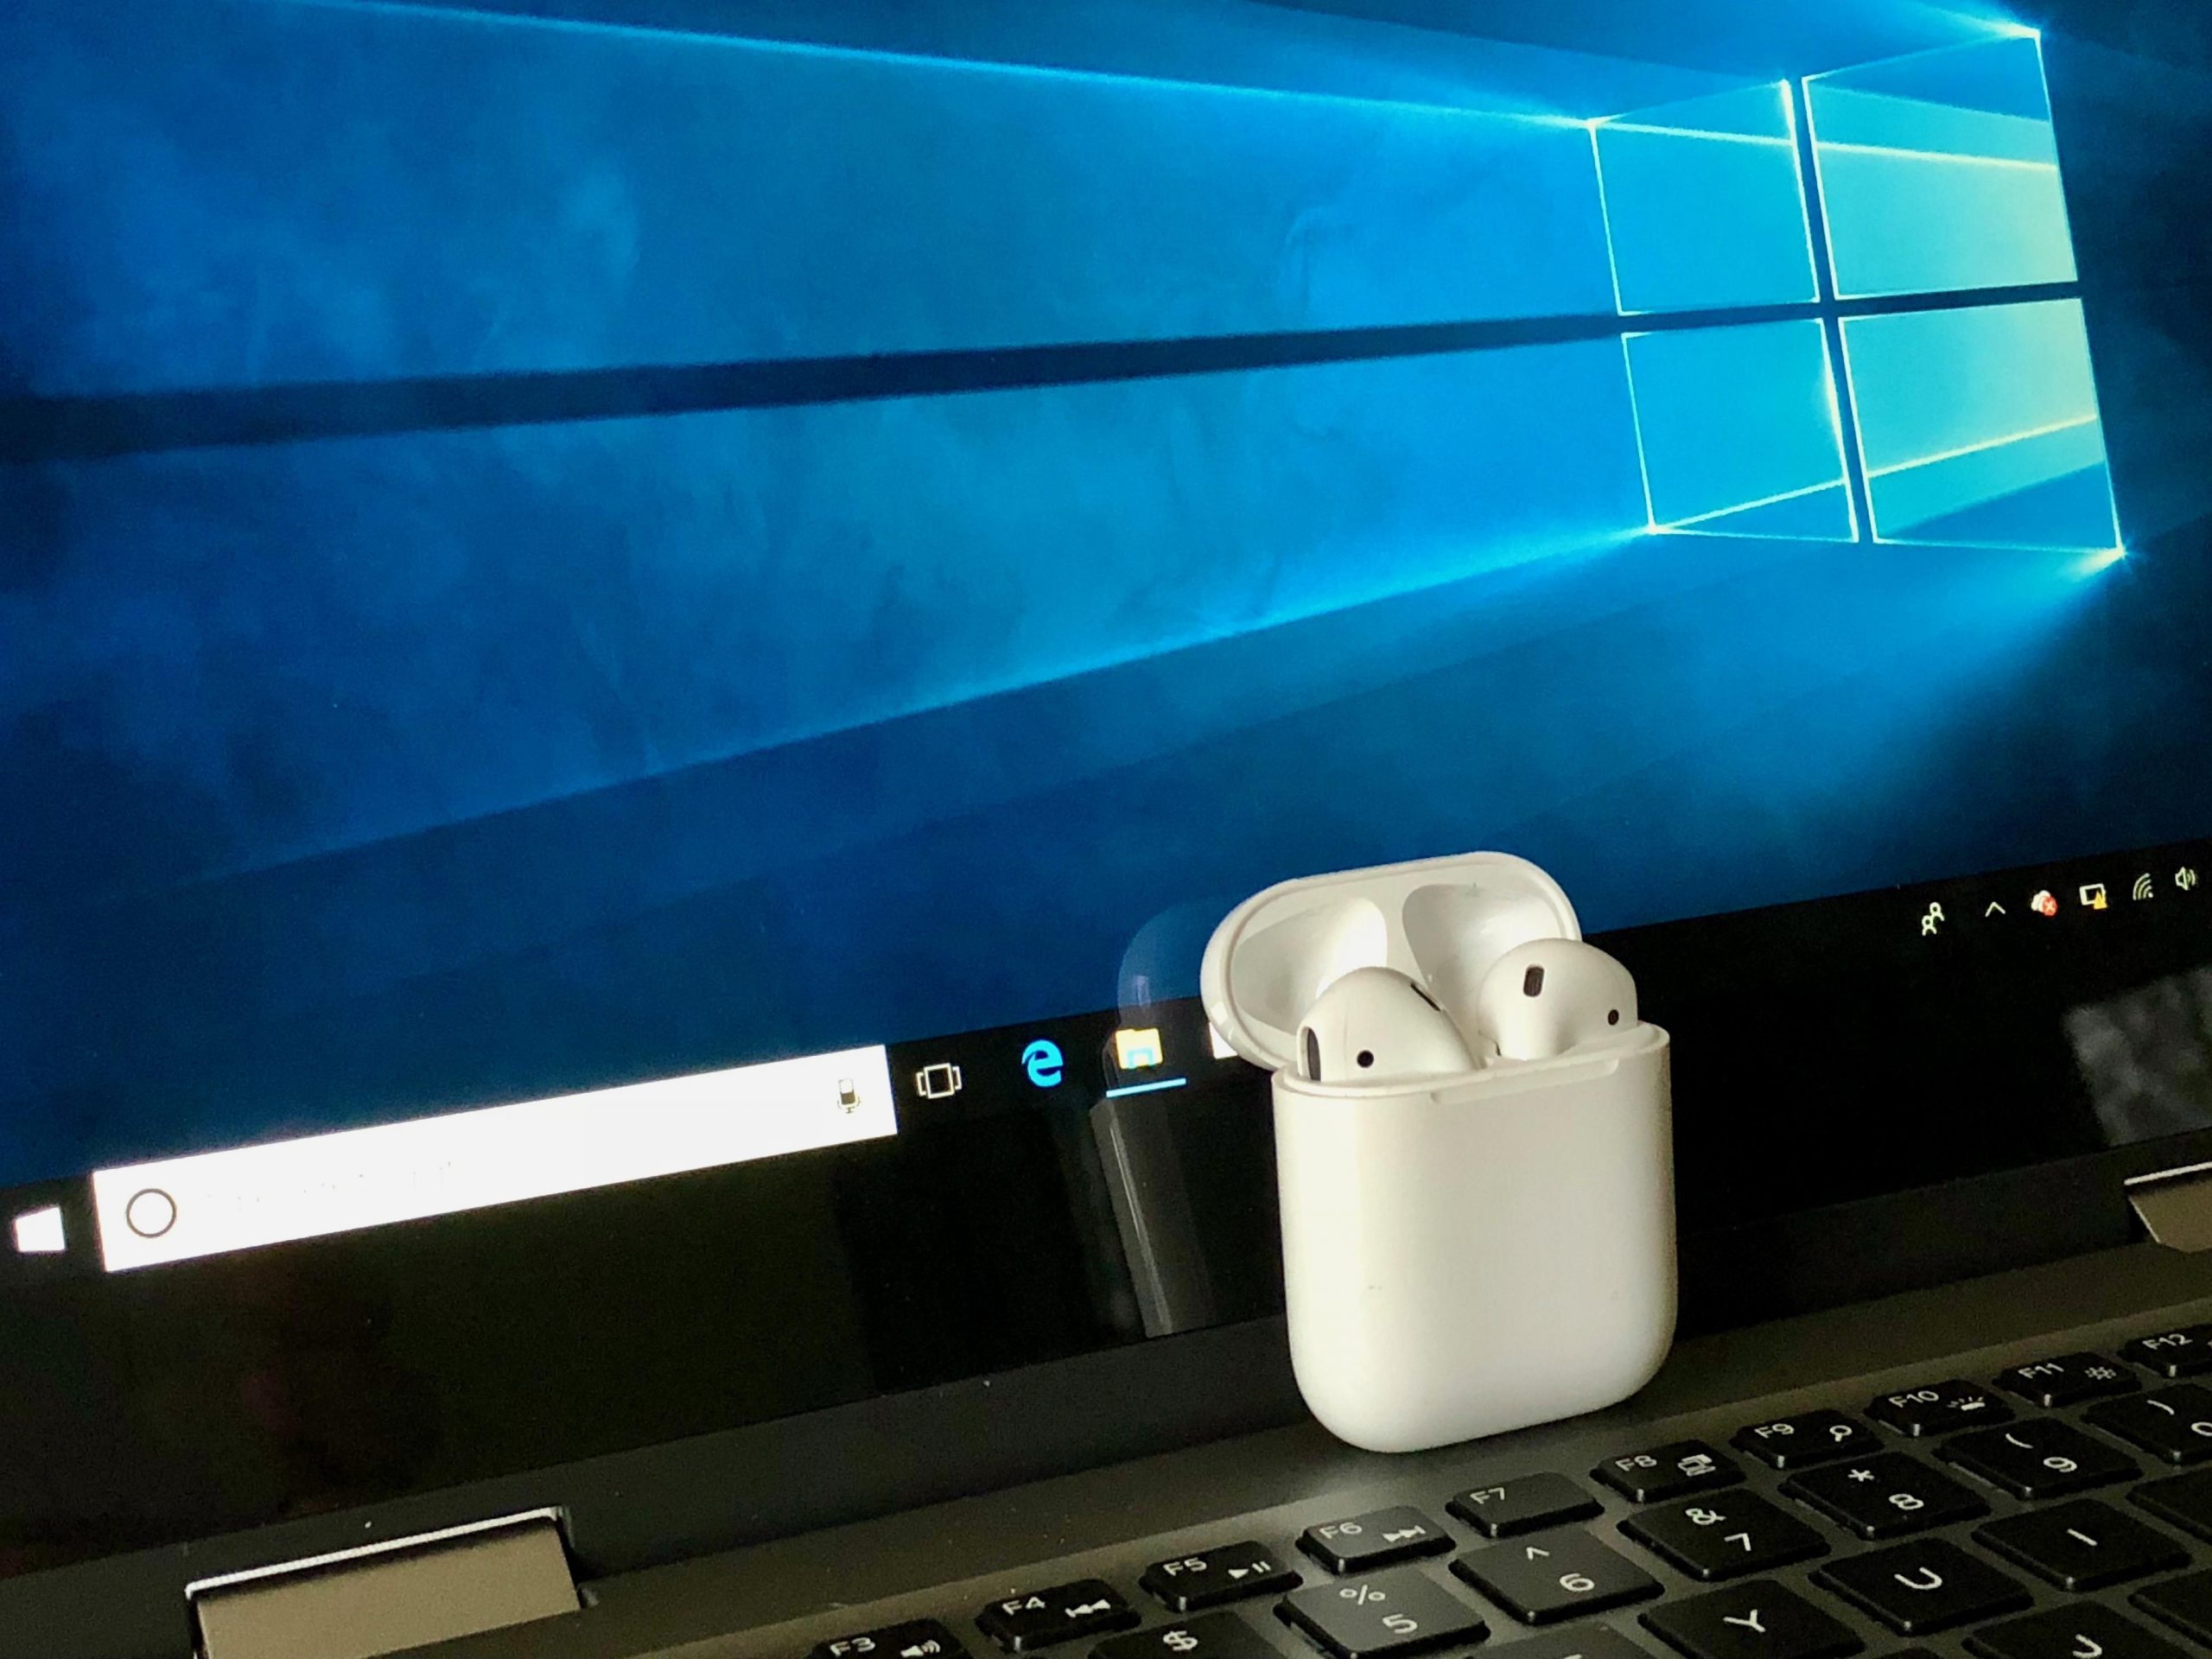 How to connect airpods to windows laptop?